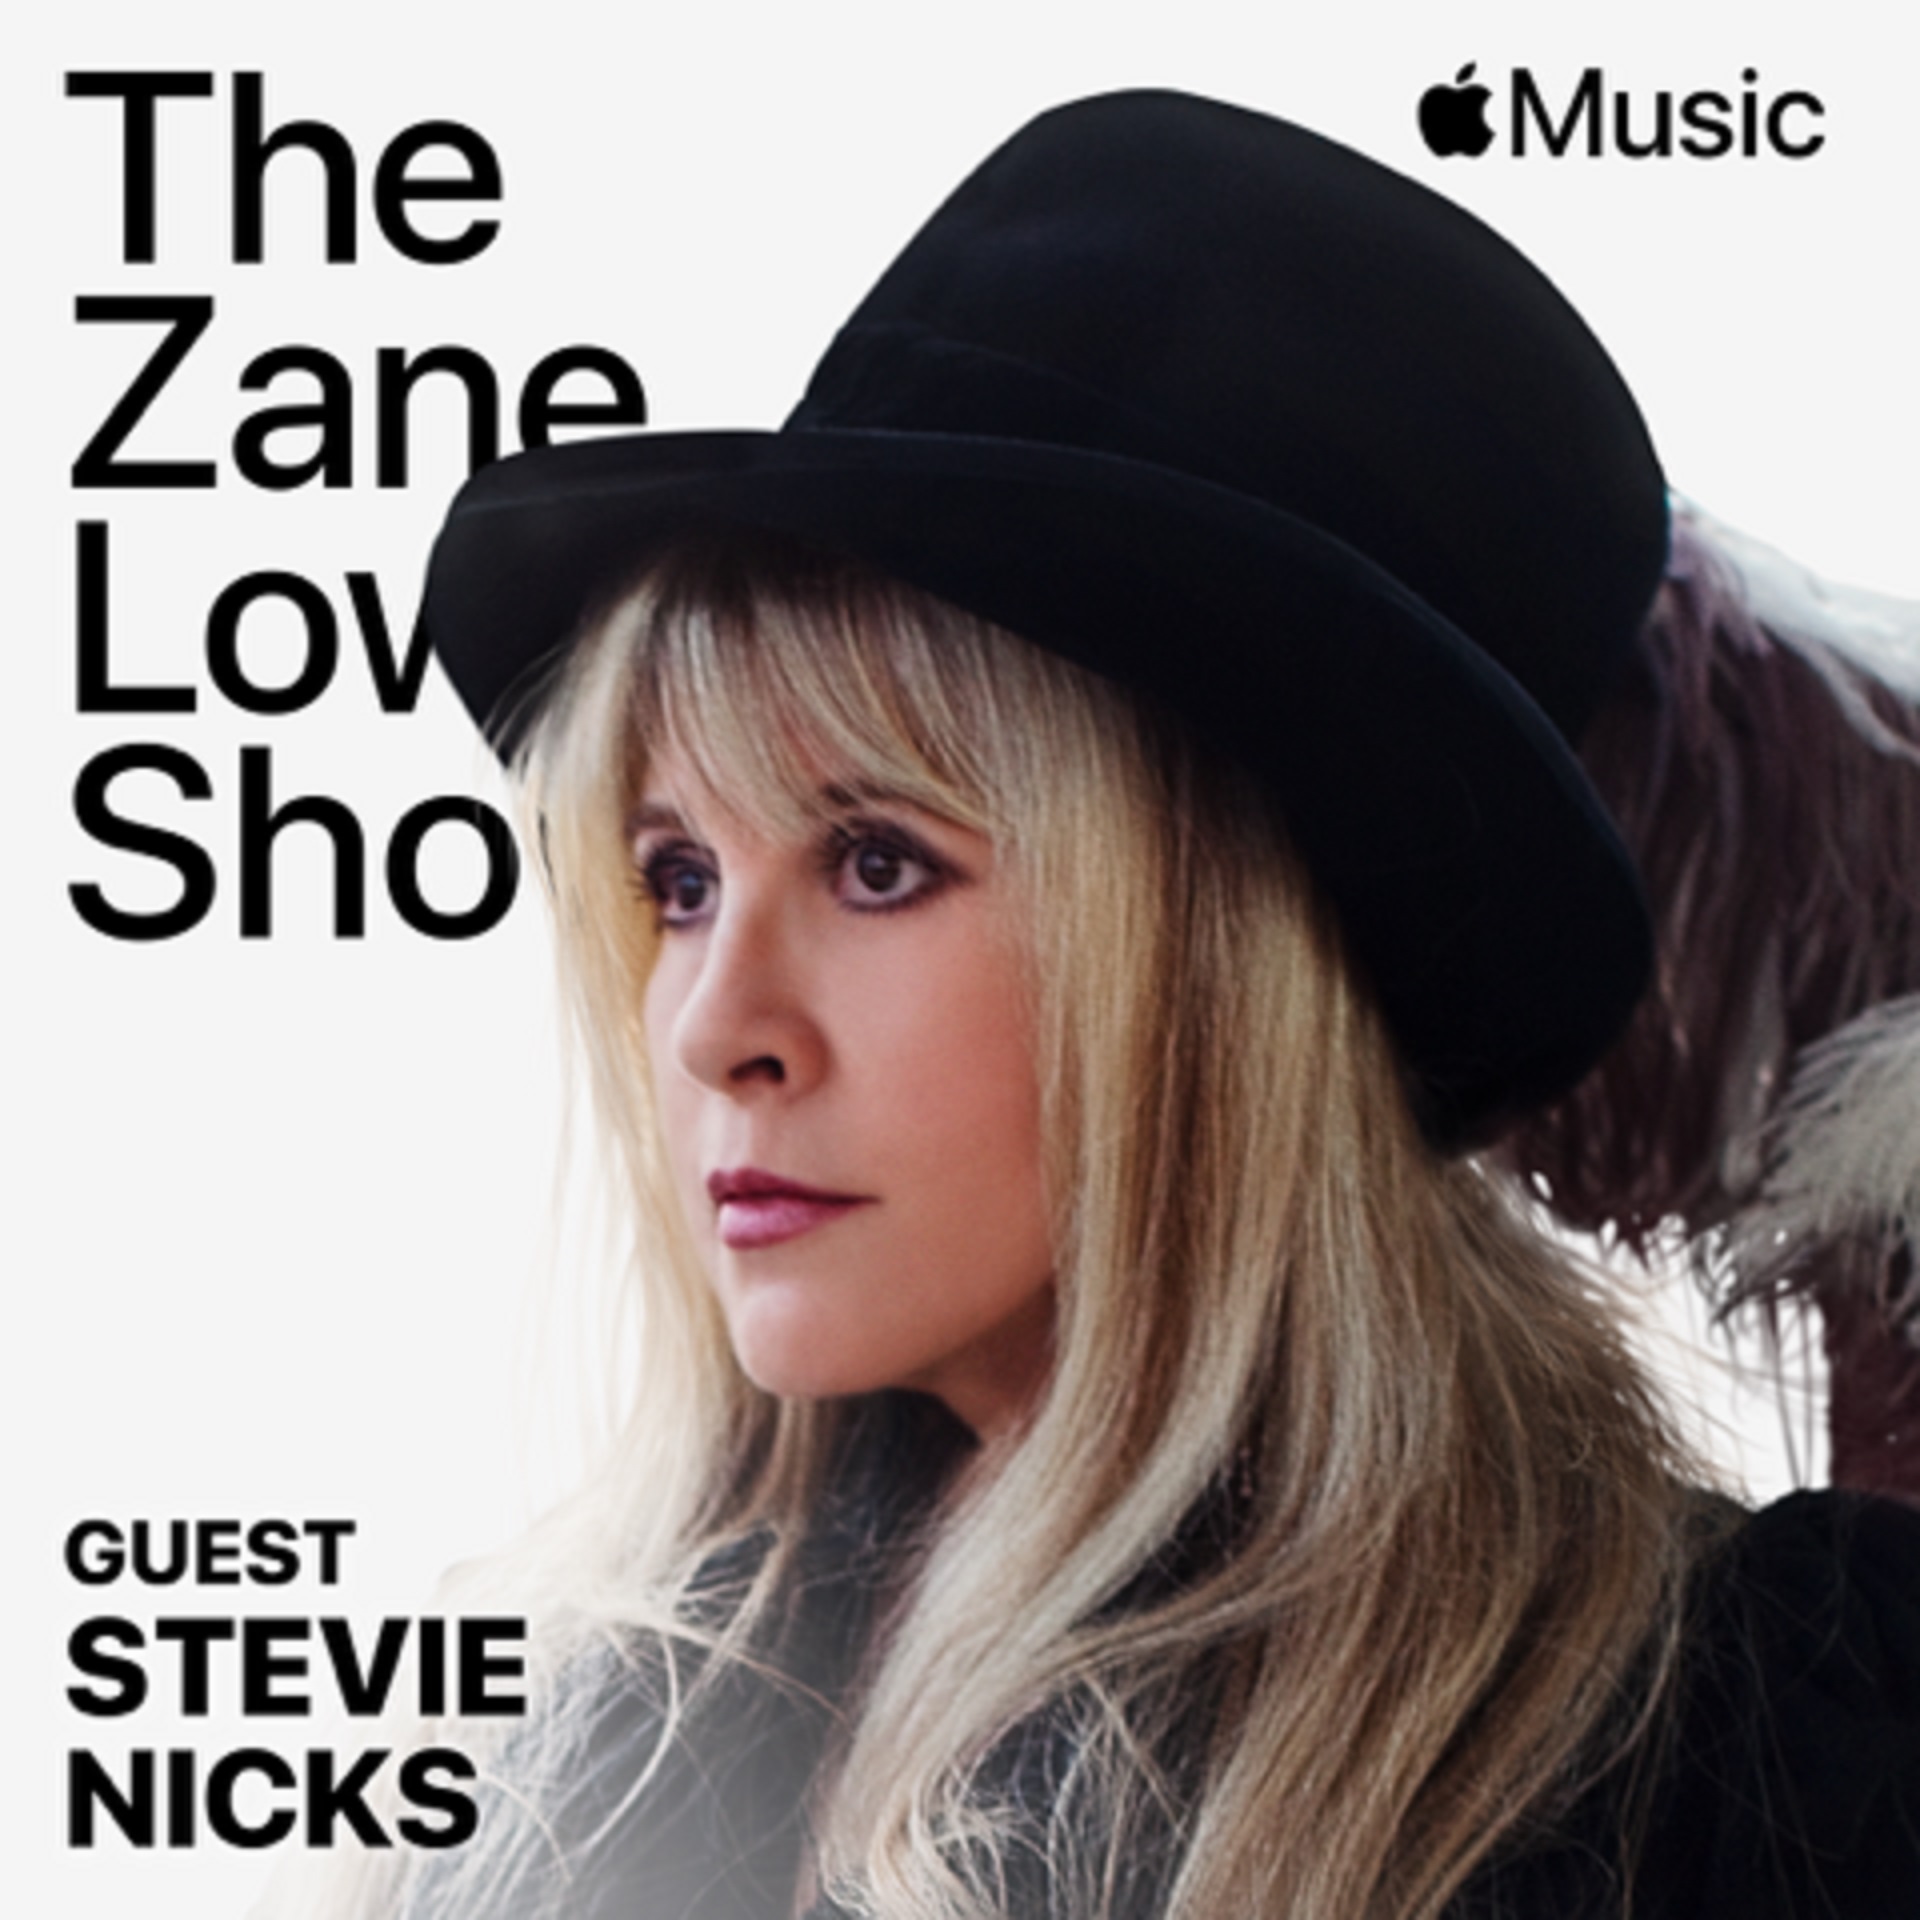 Stevie Nicks Tells Apple Music About Covering "For What It's Worth", Tour Life, Her Relationships with Prince, Tom Petty, Harry Styles, Miley Cyrus, and More